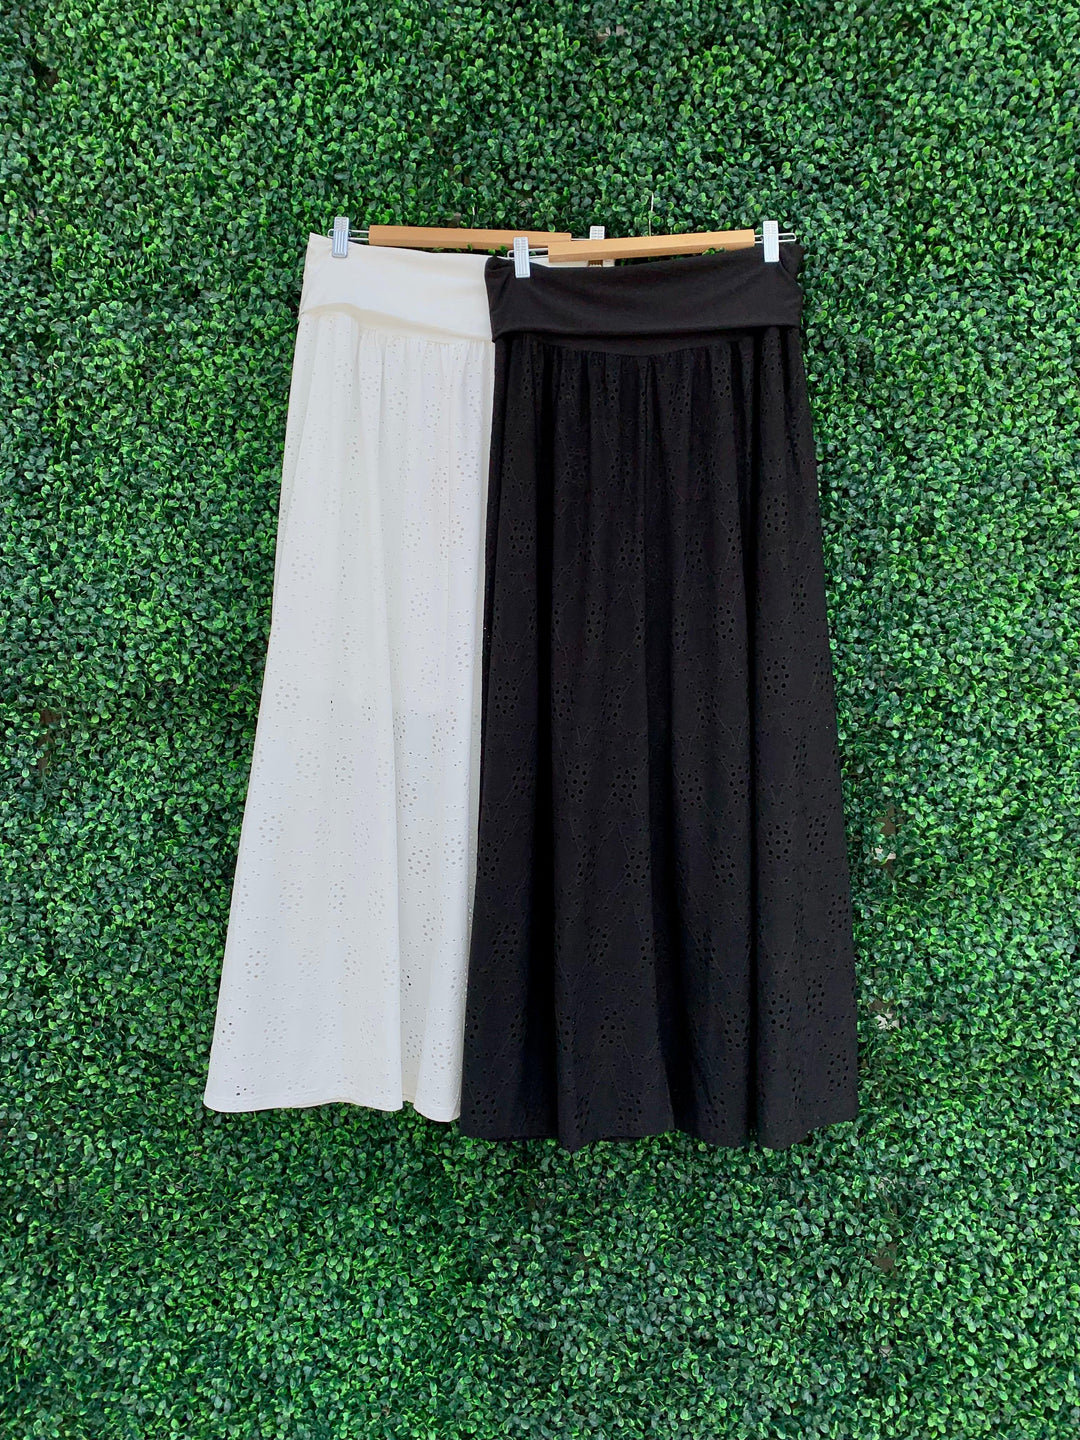 Black and white color options at women's boutique Tres Chic